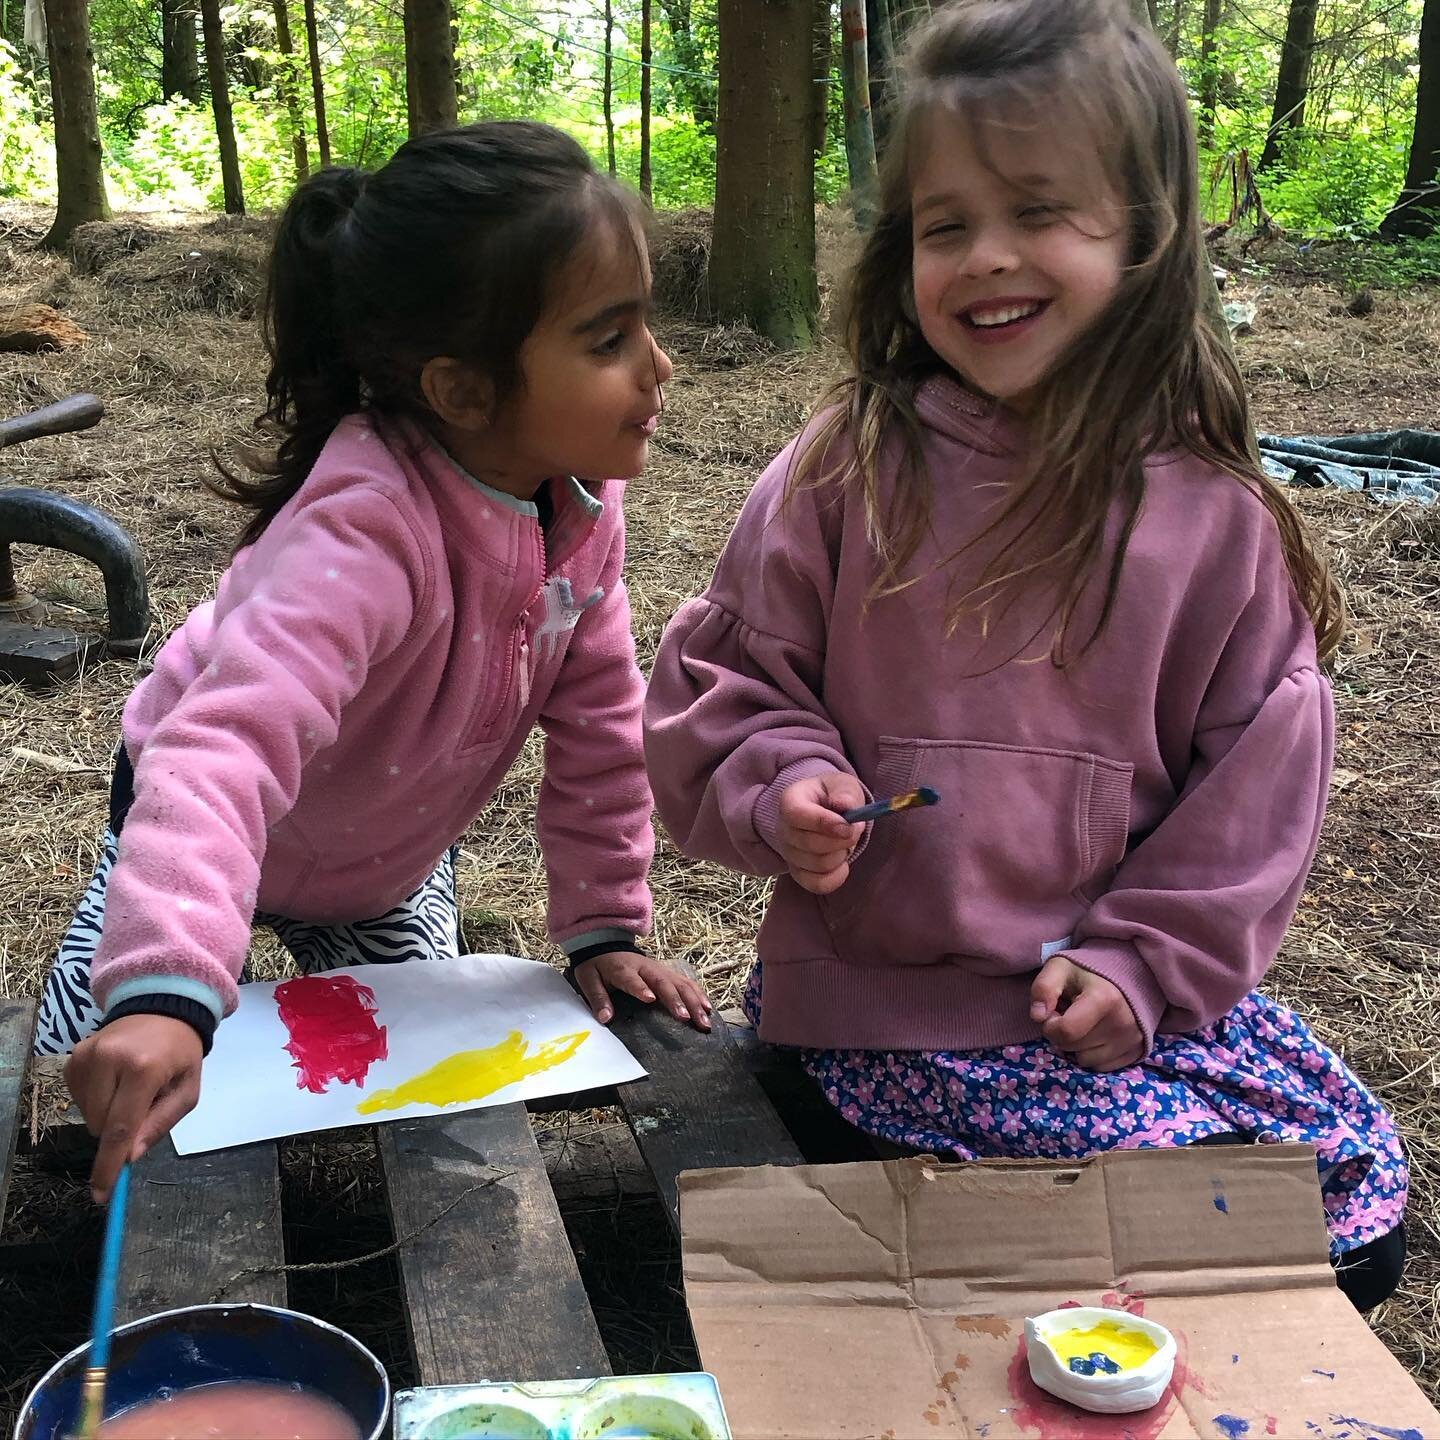 School&rsquo;s out; Summer&rsquo;s in! Do you know what that means??

It means that Summer Day Camps at Wildlings begin next week! 😎

During school holidays, Wildlings remain open for seasonal Day Camps that run alongside our regular Child Days. The